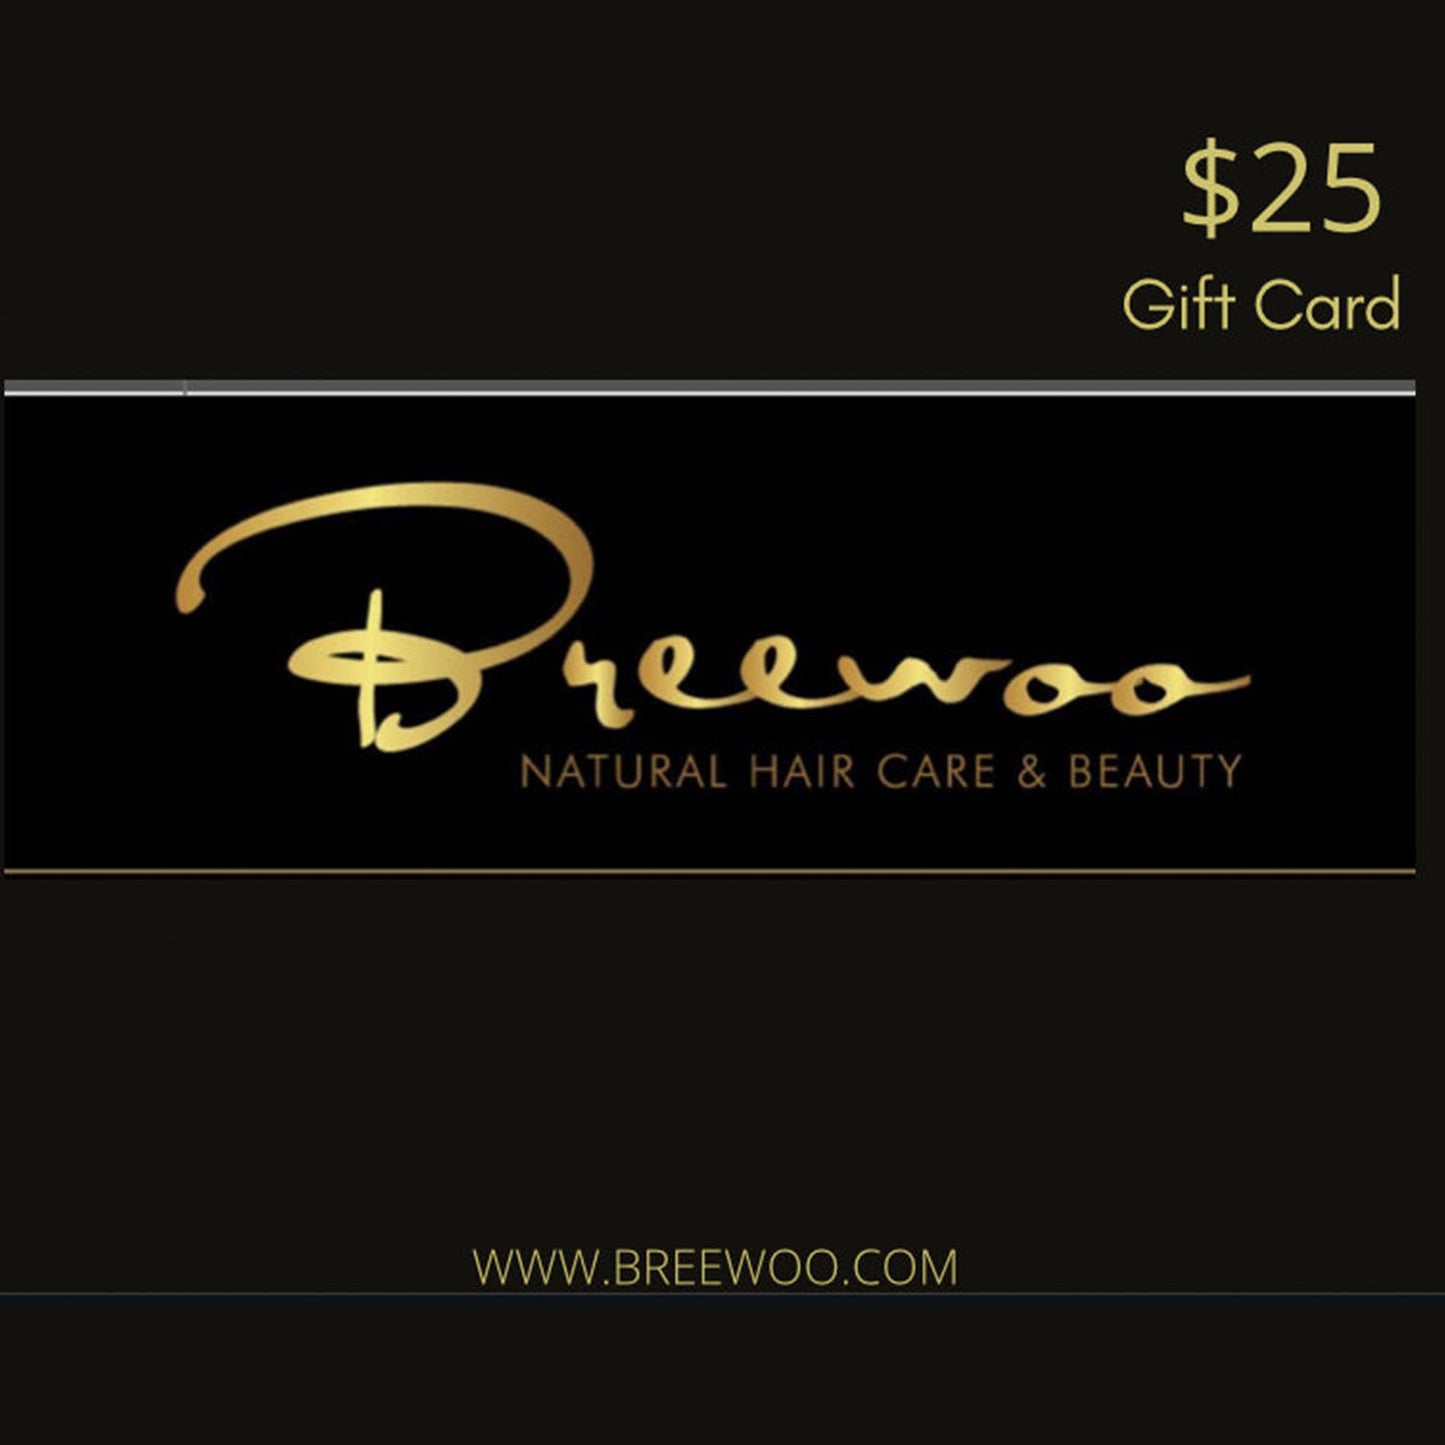 Give the gift of a Breewoo gift card